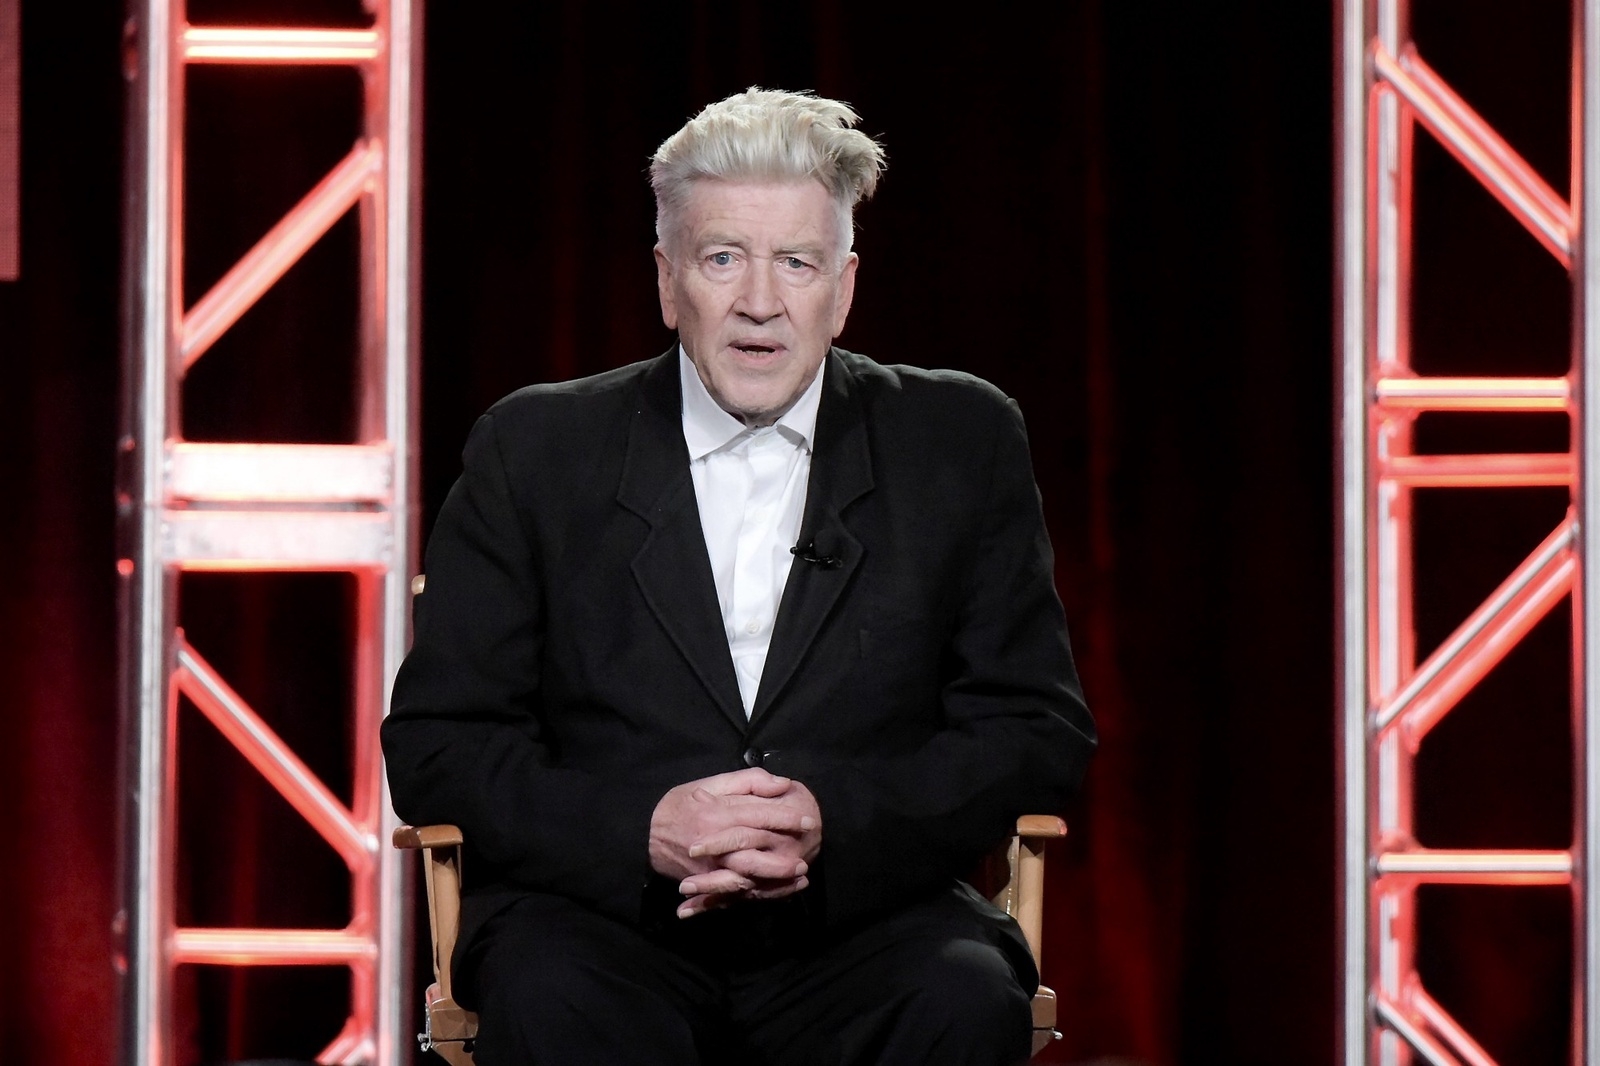 David Lynch attends the ”Twin Peaks” panel at the Showtime portion of the 2017 Winter Television Critics Association press tour on Monday, Jan. 9, 2017, in Pasadena, Calif. (Photo by Richard Shotwell/Invision/AP)